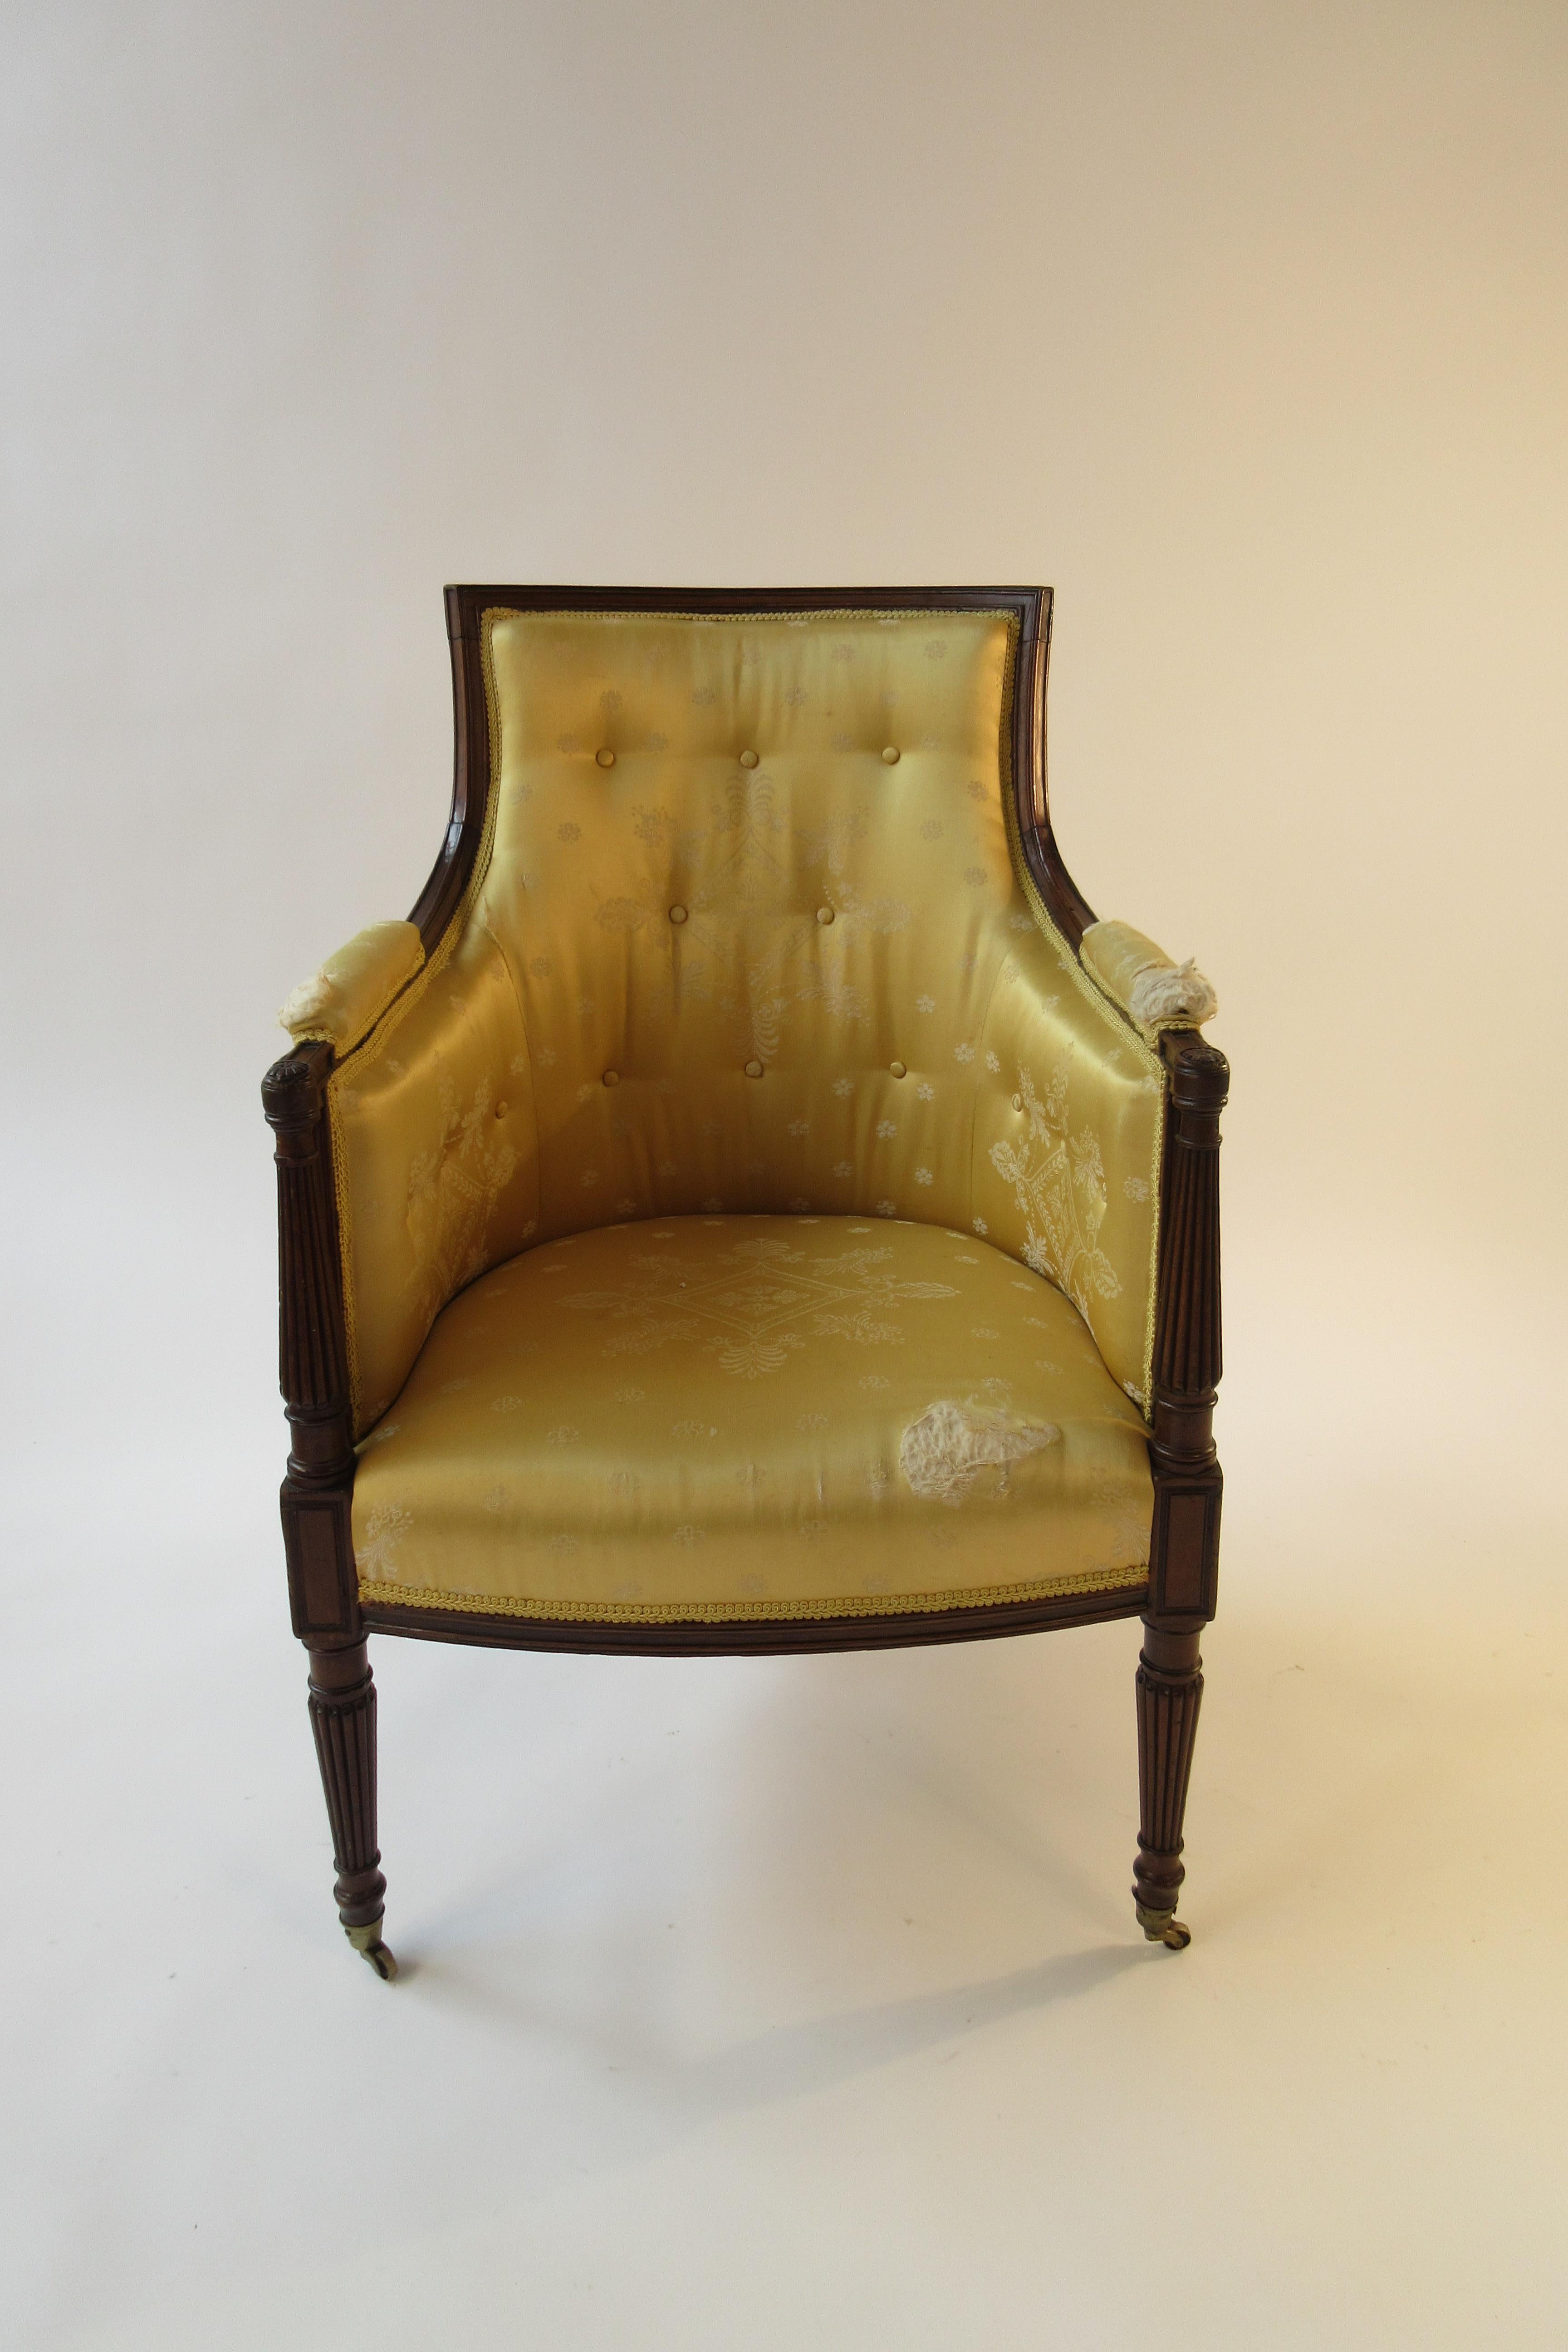 1920s Federal armchair on casters. Needs reupholstering.